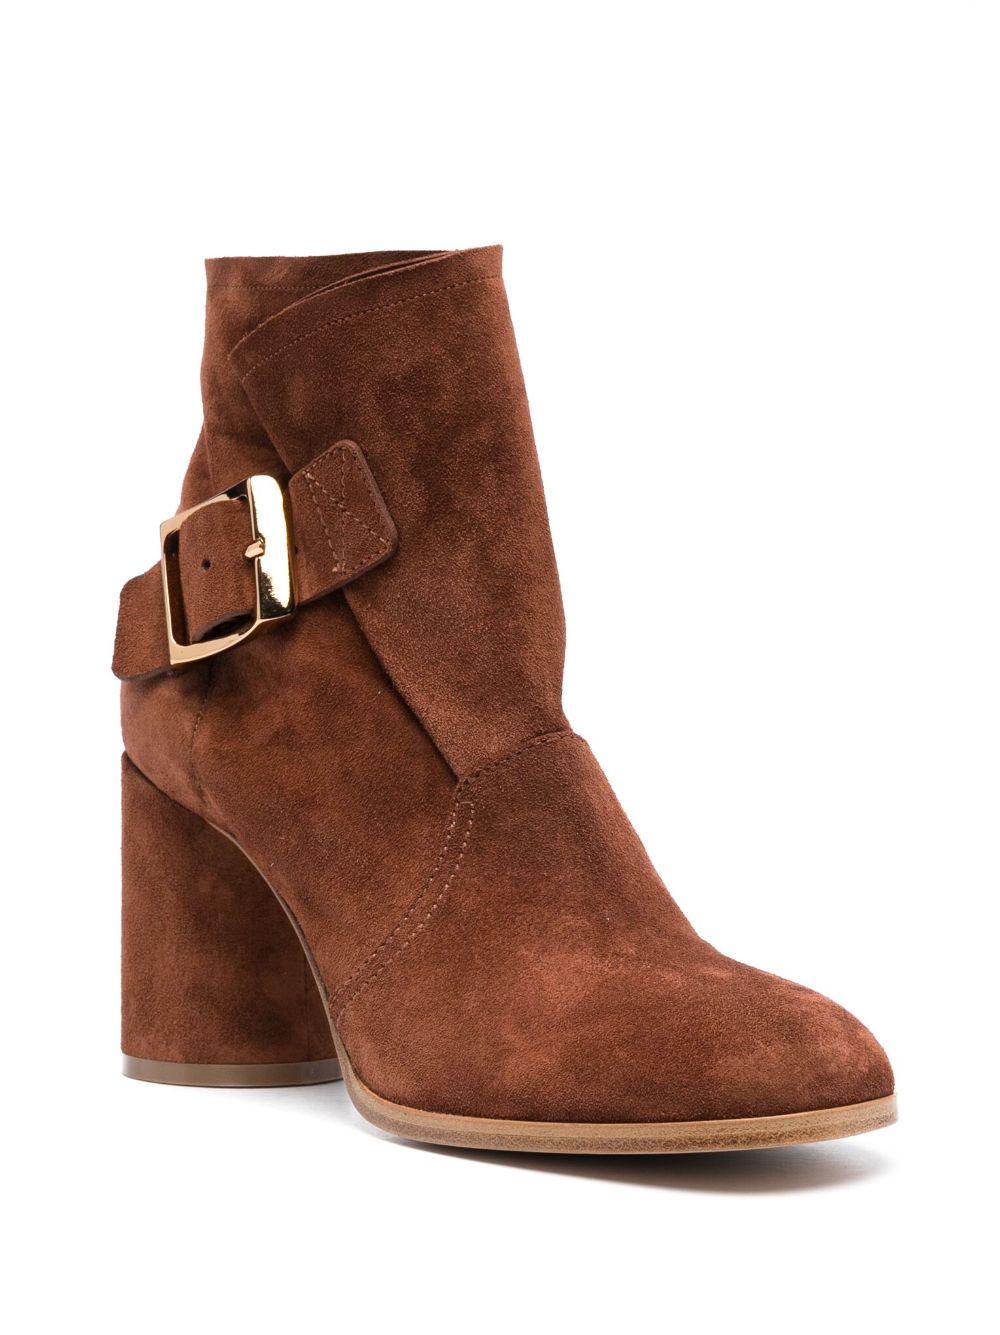 Casadei Cleo Kate 85mm suede boots - Bruin